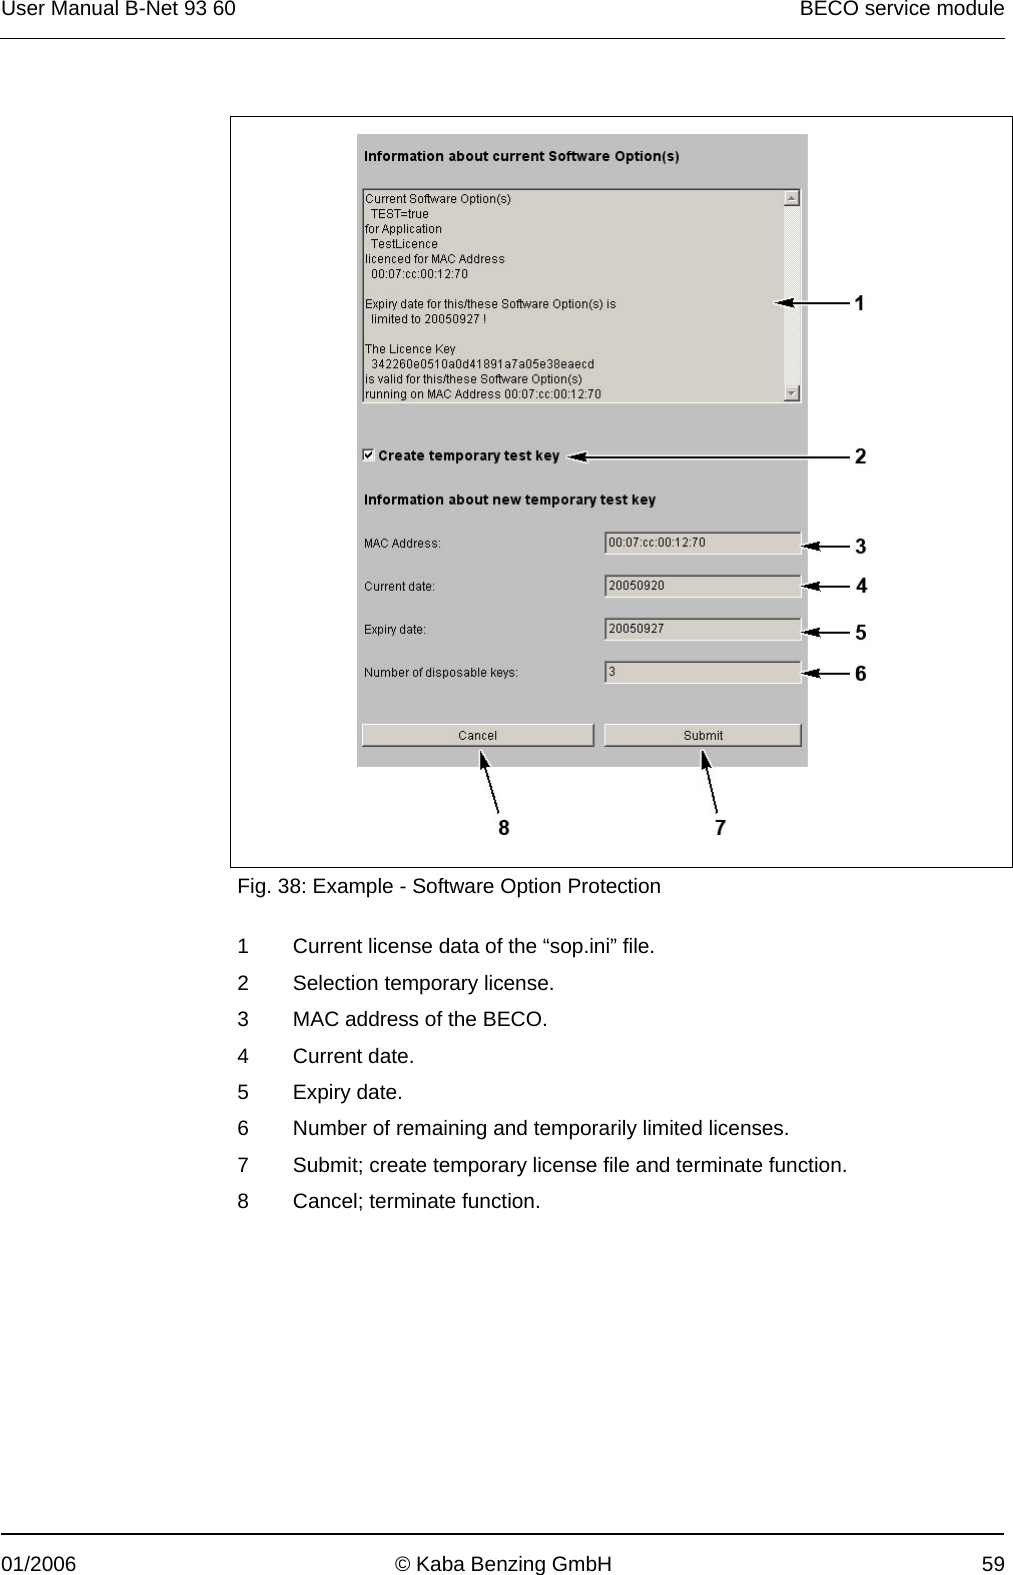 User Manual B-Net 93 60   BECO service module  01/2006  © Kaba Benzing GmbH  59    Fig. 38: Example - Software Option Protection  1  Current license data of the “sop.ini” file. 2  Selection temporary license. 3  MAC address of the BECO. 4 Current date. 5 Expiry date. 6  Number of remaining and temporarily limited licenses. 7  Submit; create temporary license file and terminate function. 8  Cancel; terminate function.  